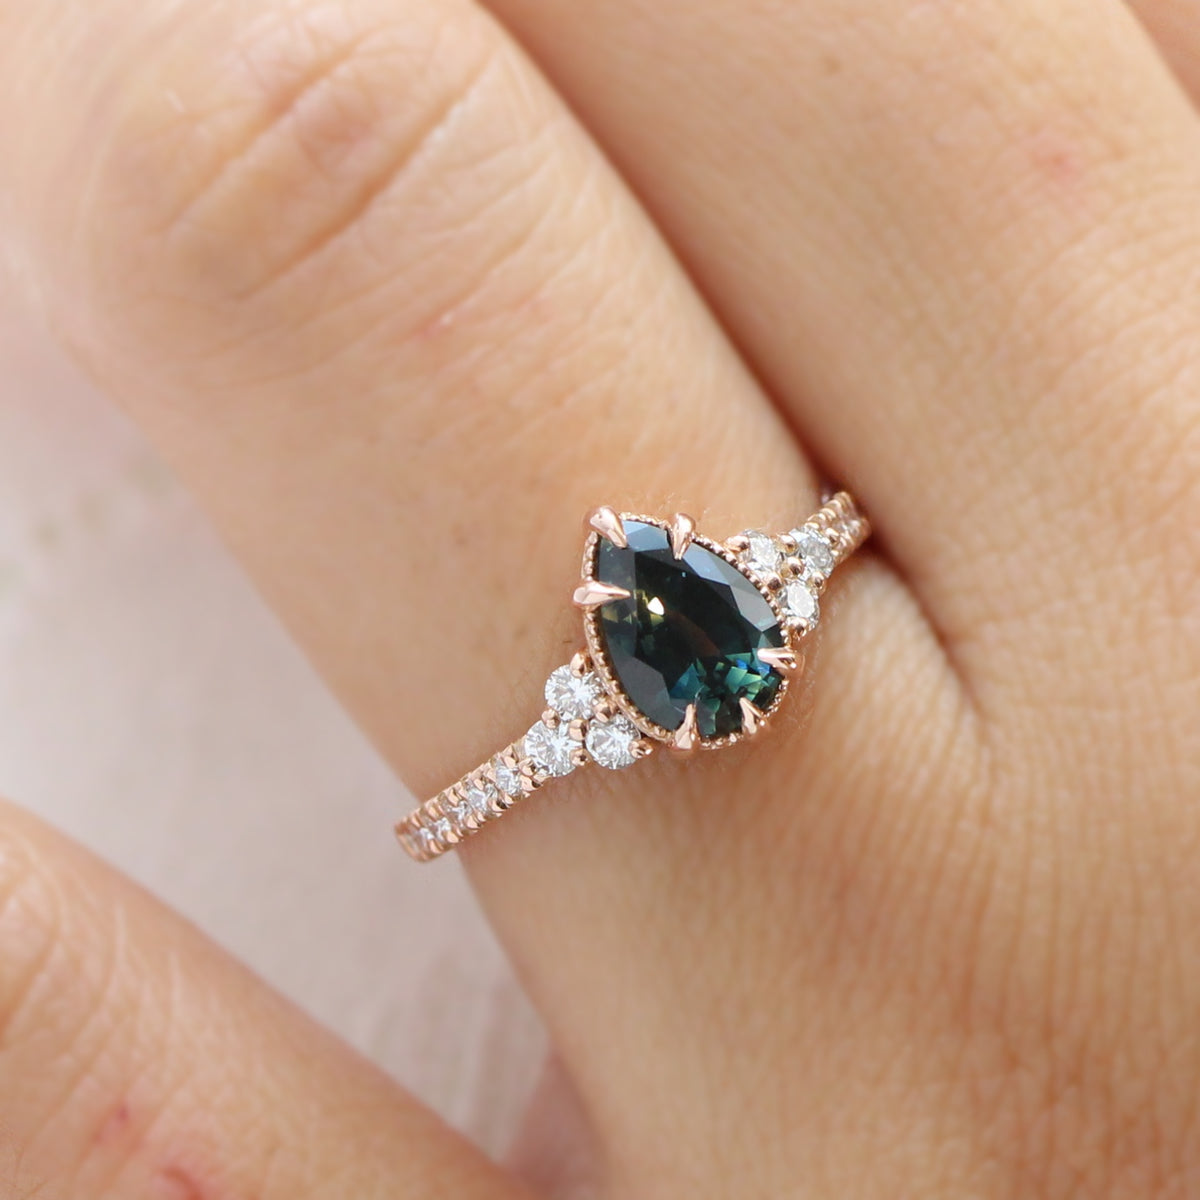 Pear teal green sapphire diamond ring rose gold vintage 3 stone ring la more design jewelry